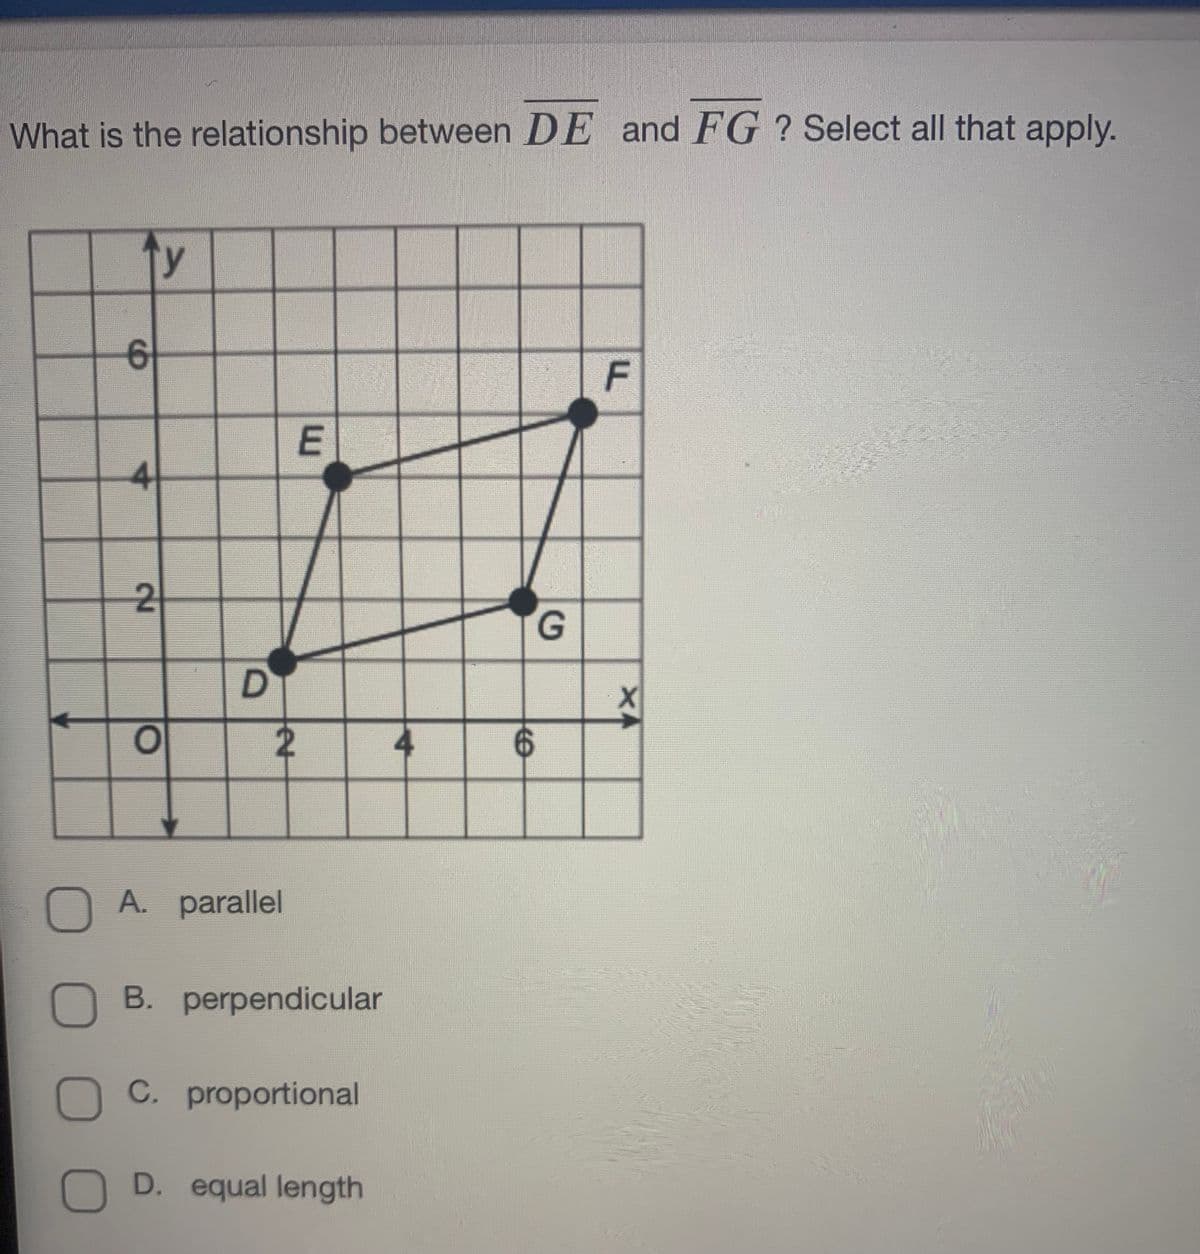 What is the relationship between DE and FG ? Select all that apply.
ty
4
2
G.
4
OA. parallel
B. perpendicular
C. proportional
D. equal length
F.
X4
D.
6.
